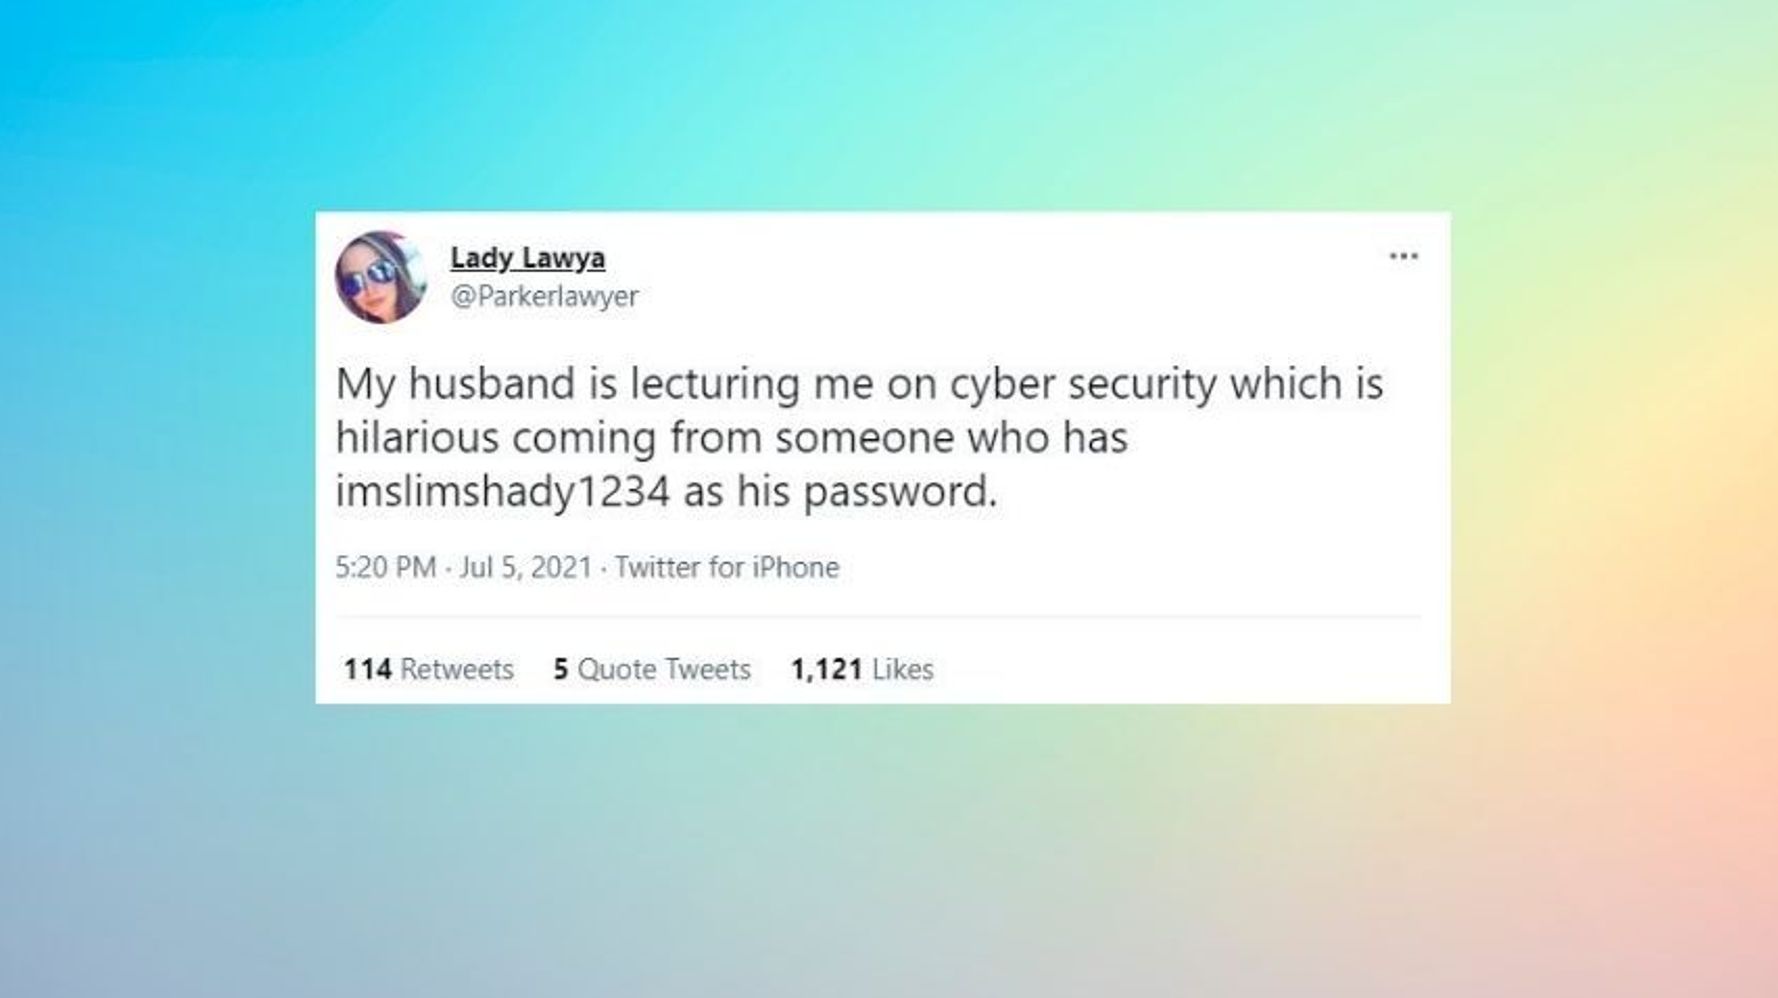 30 Of The Funniest Tweets About Married Life (June 29-July 12)